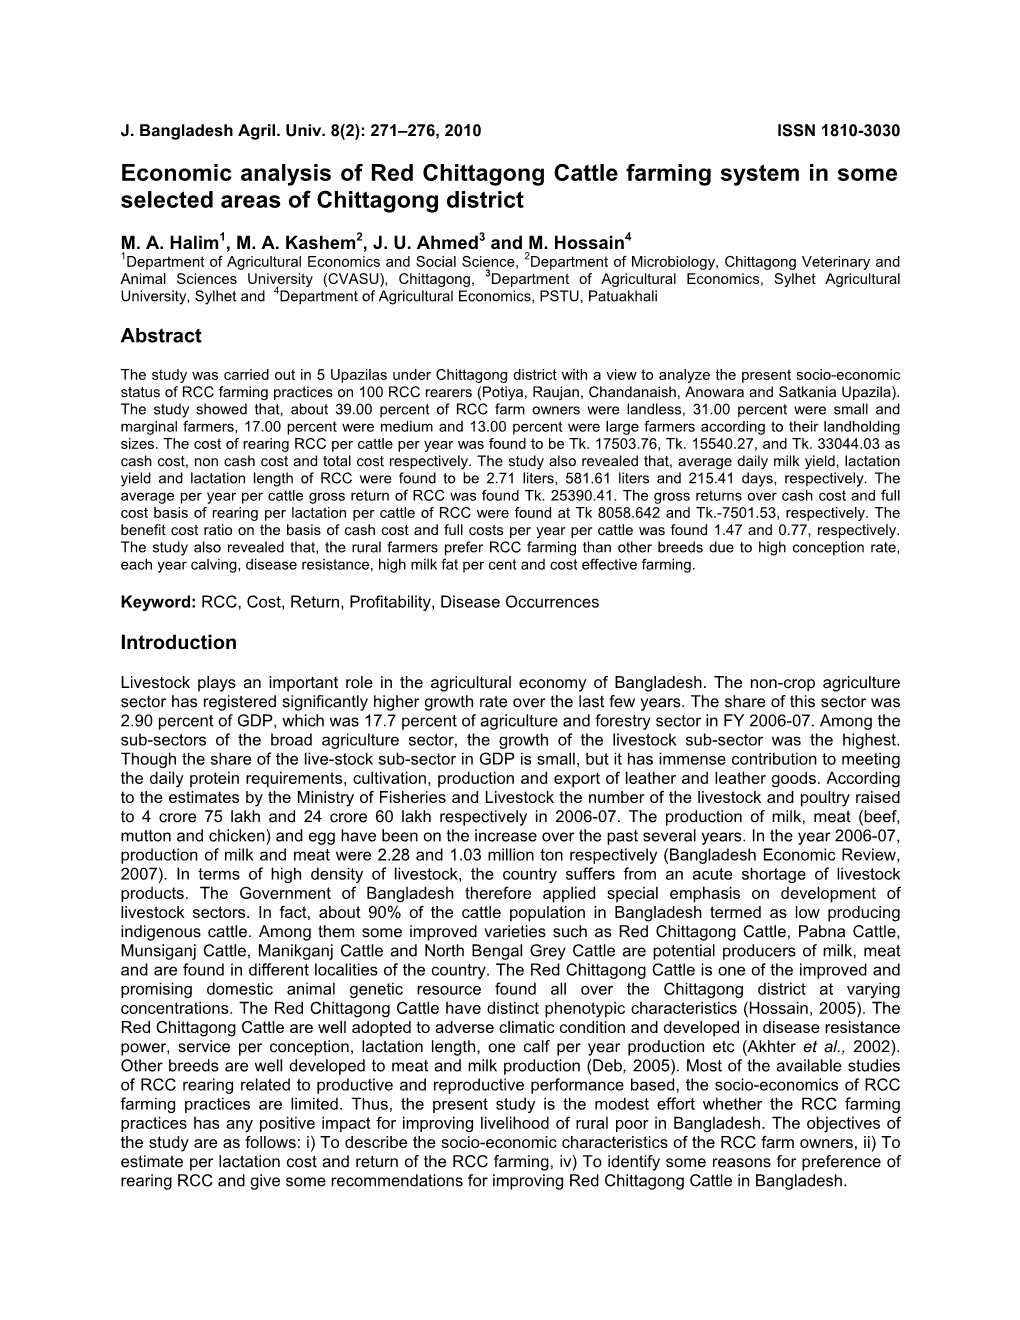 Economic Analysis of Red Chittagong Cattle Farming System in Some Selected Areas of Chittagong District